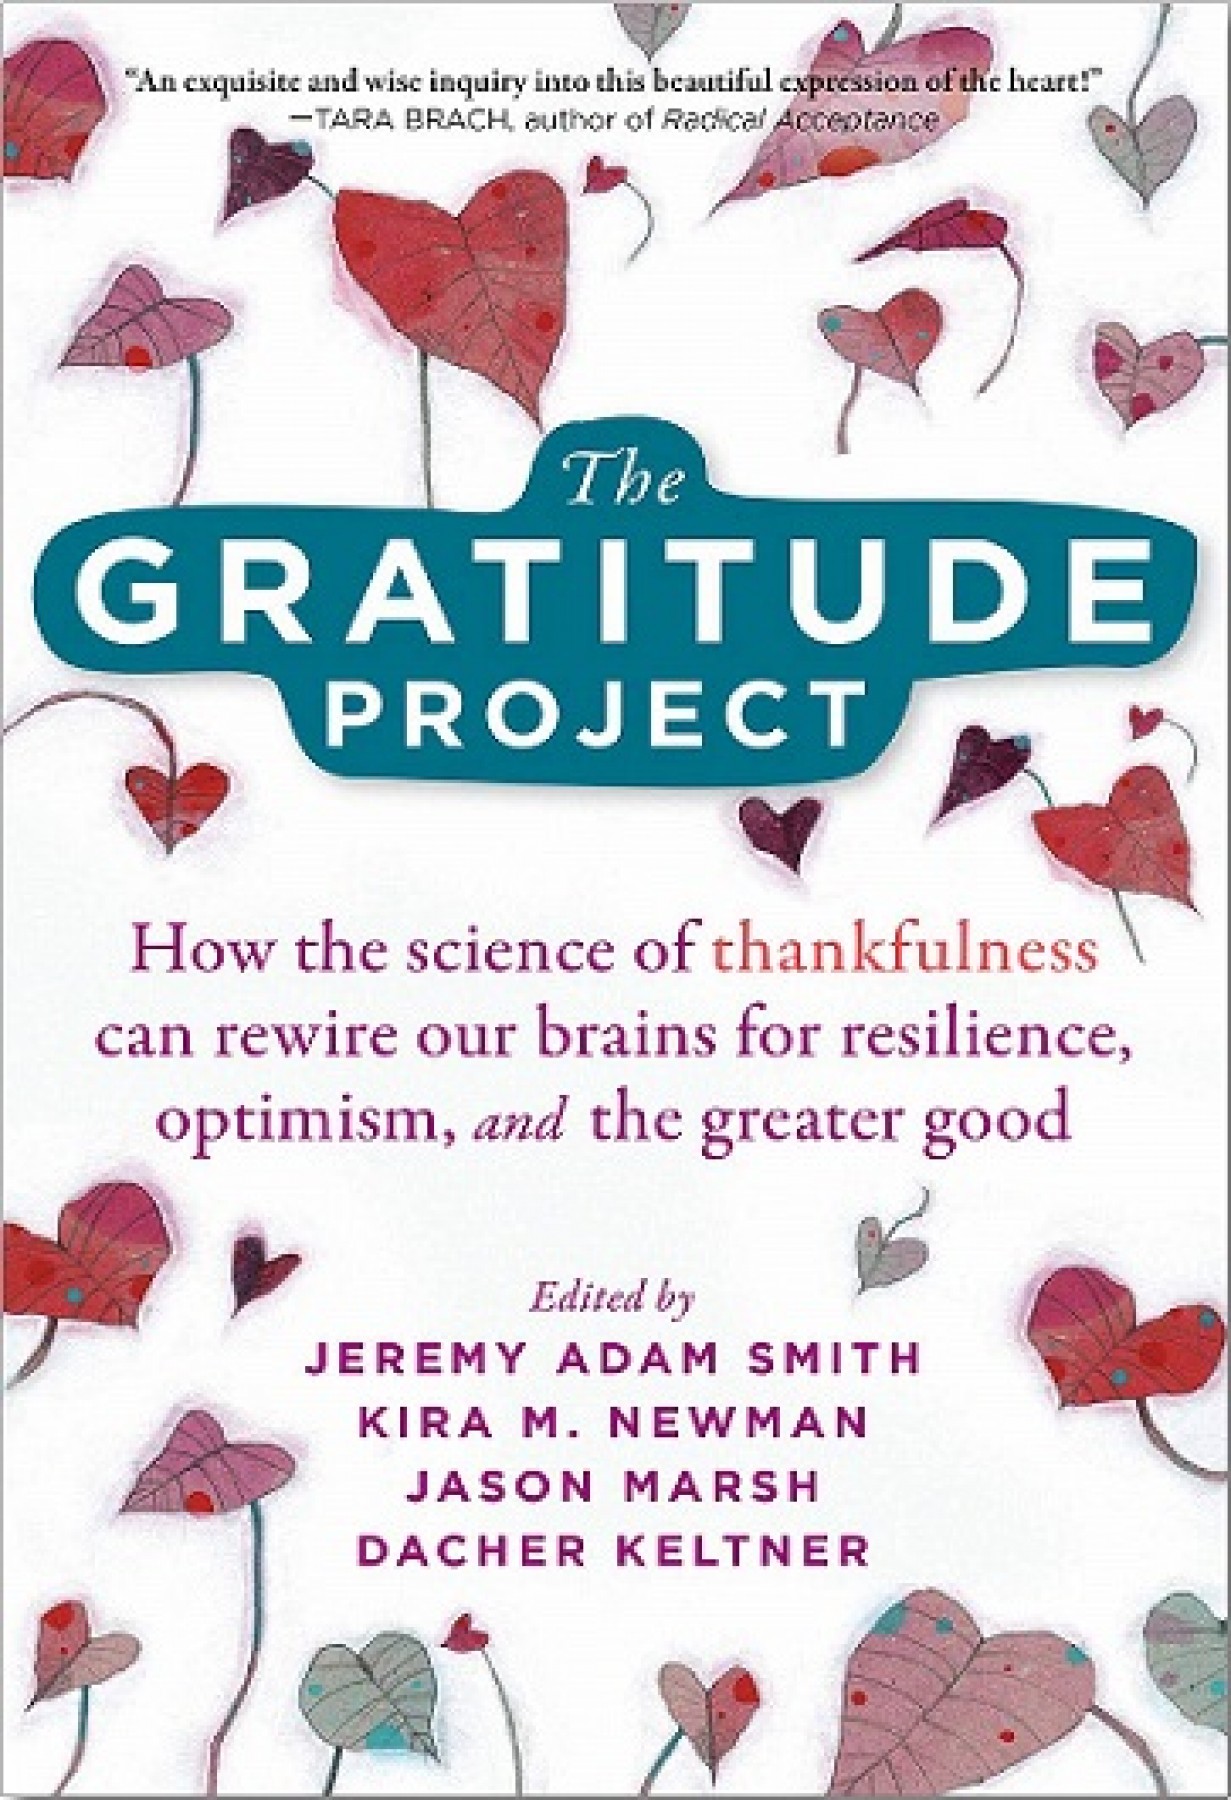 The Gratitude Project: How the science of thankfulness can rewire our brains for resilience, optimism, and the greater good